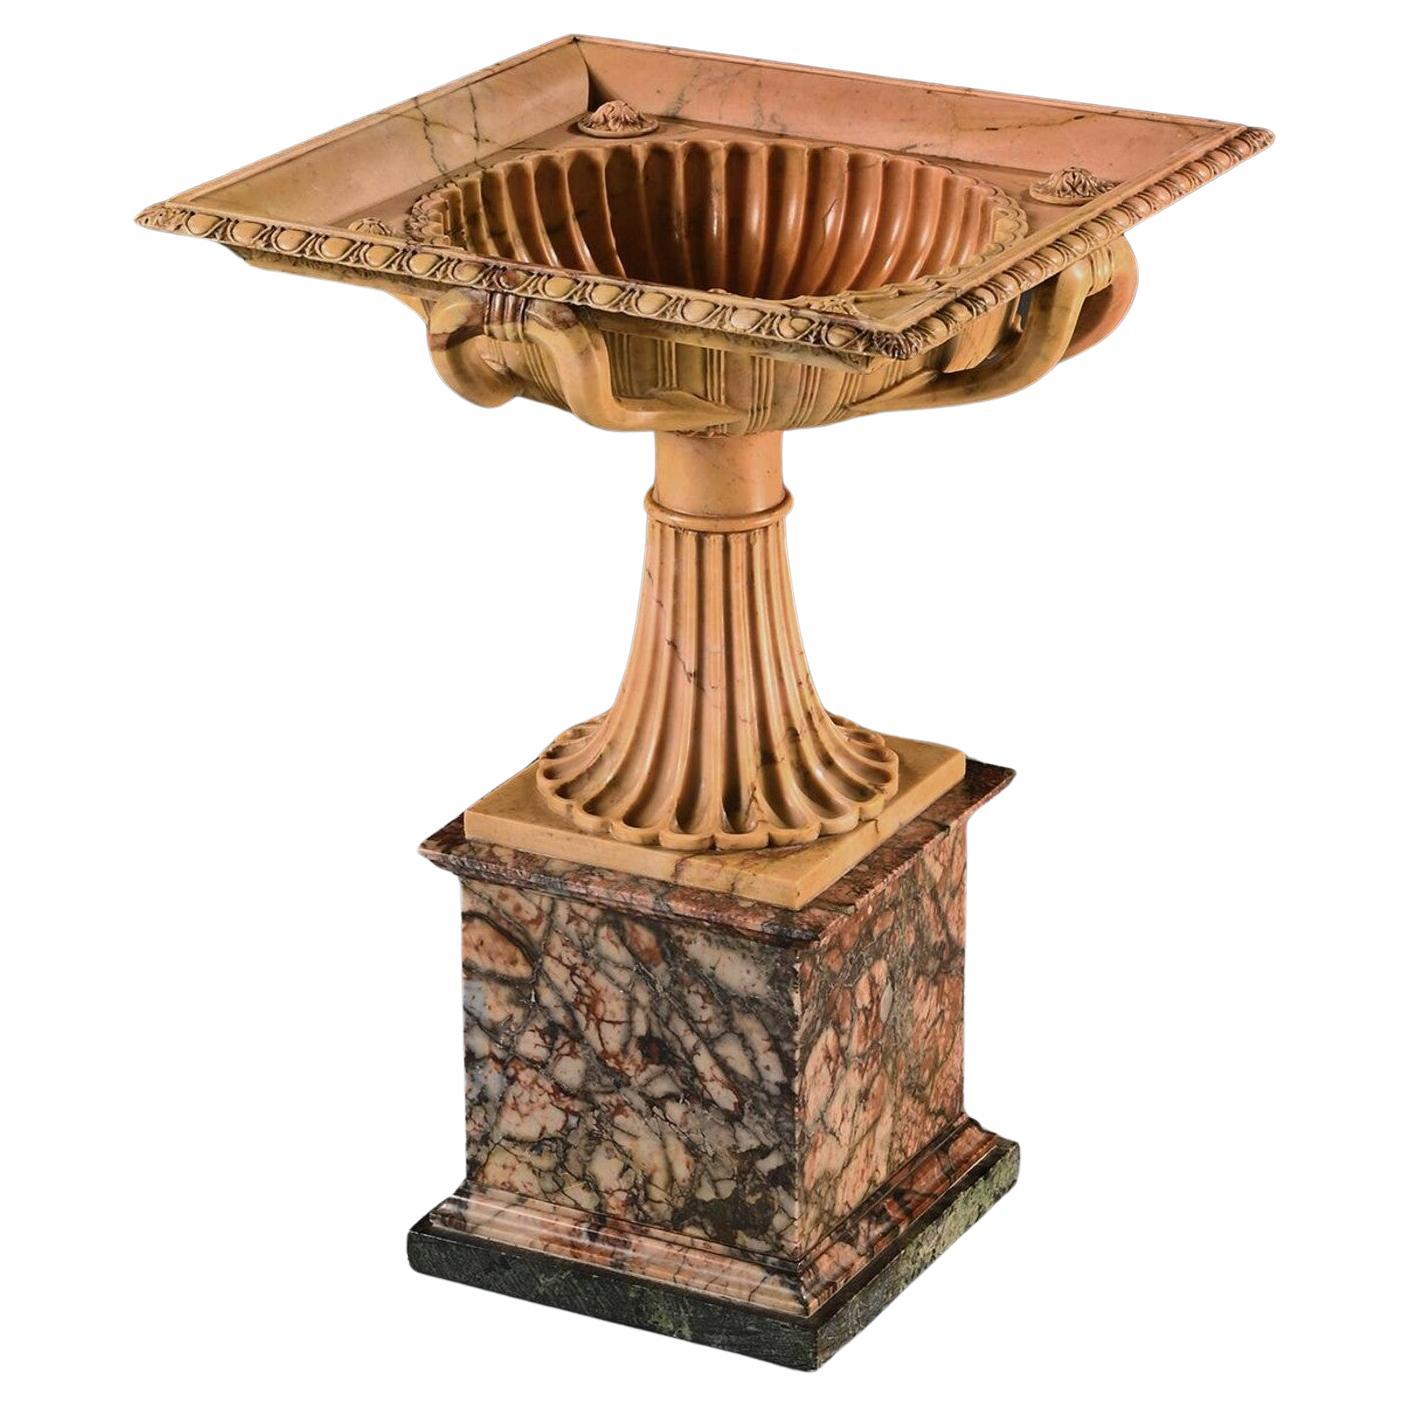 An Exquisite Giallo Antico Tazza of Unusual Square Section With Finely Carved In For Sale